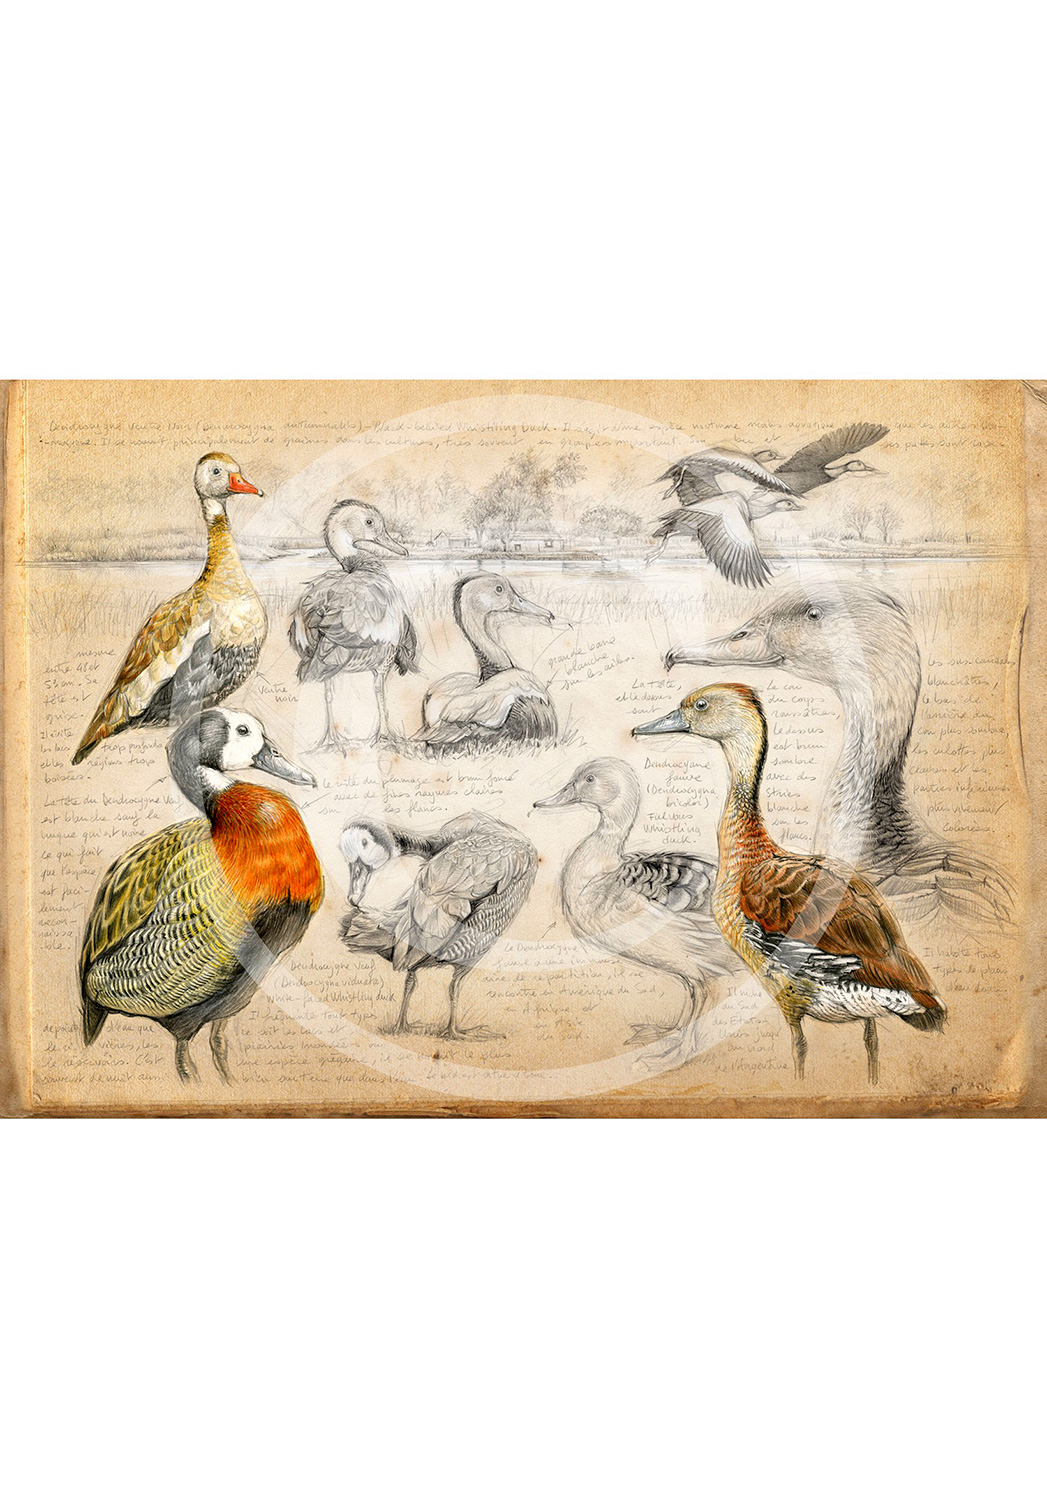 Marcello-art: Wish Card 237 - Whistling Duck